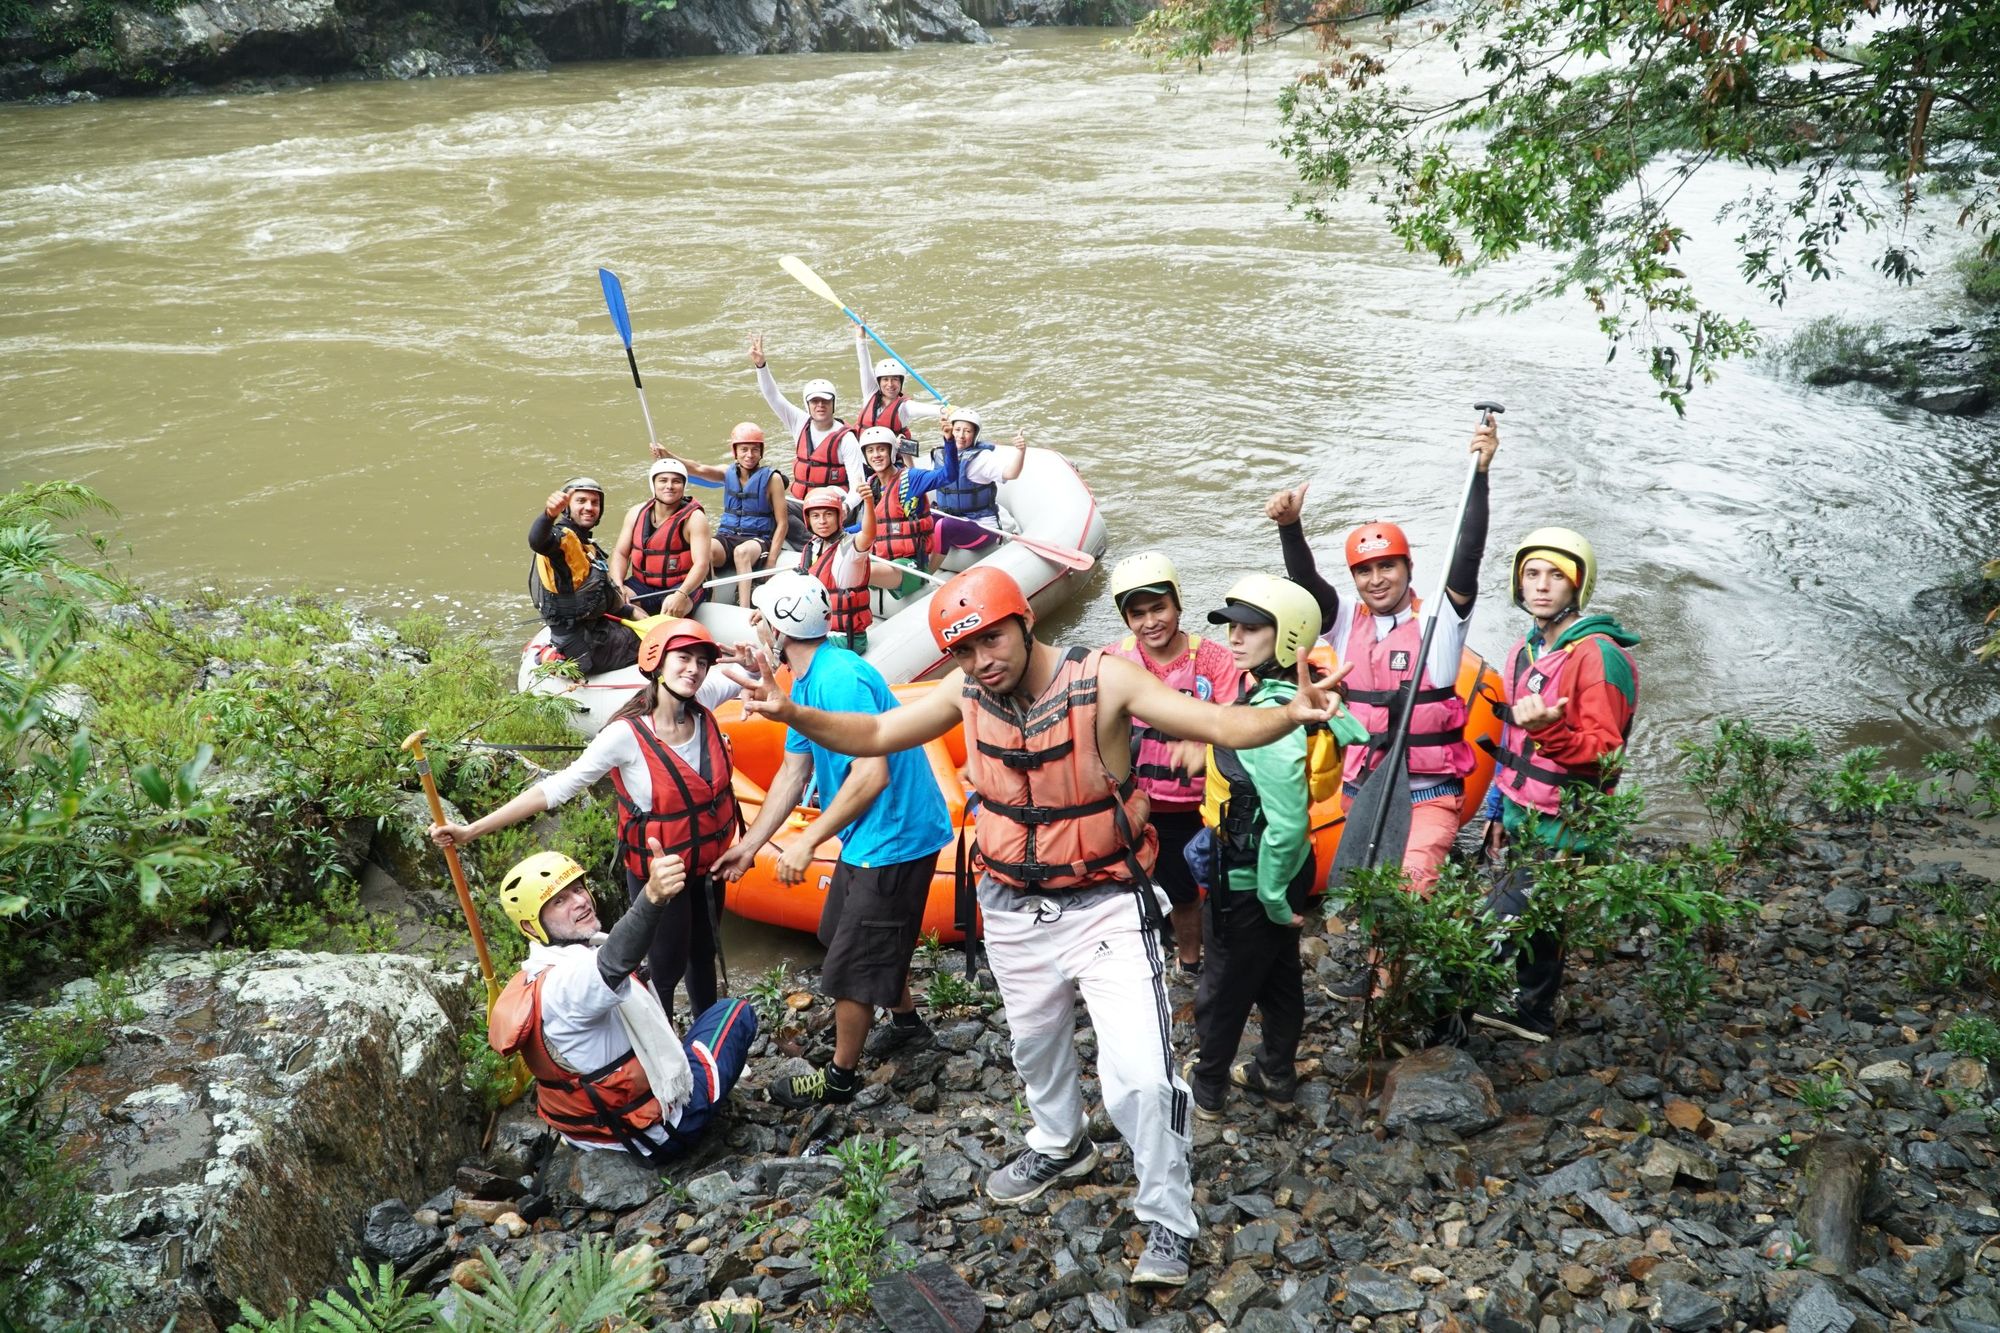 A rafting group posing on the banks of the Samana River, in Colombia